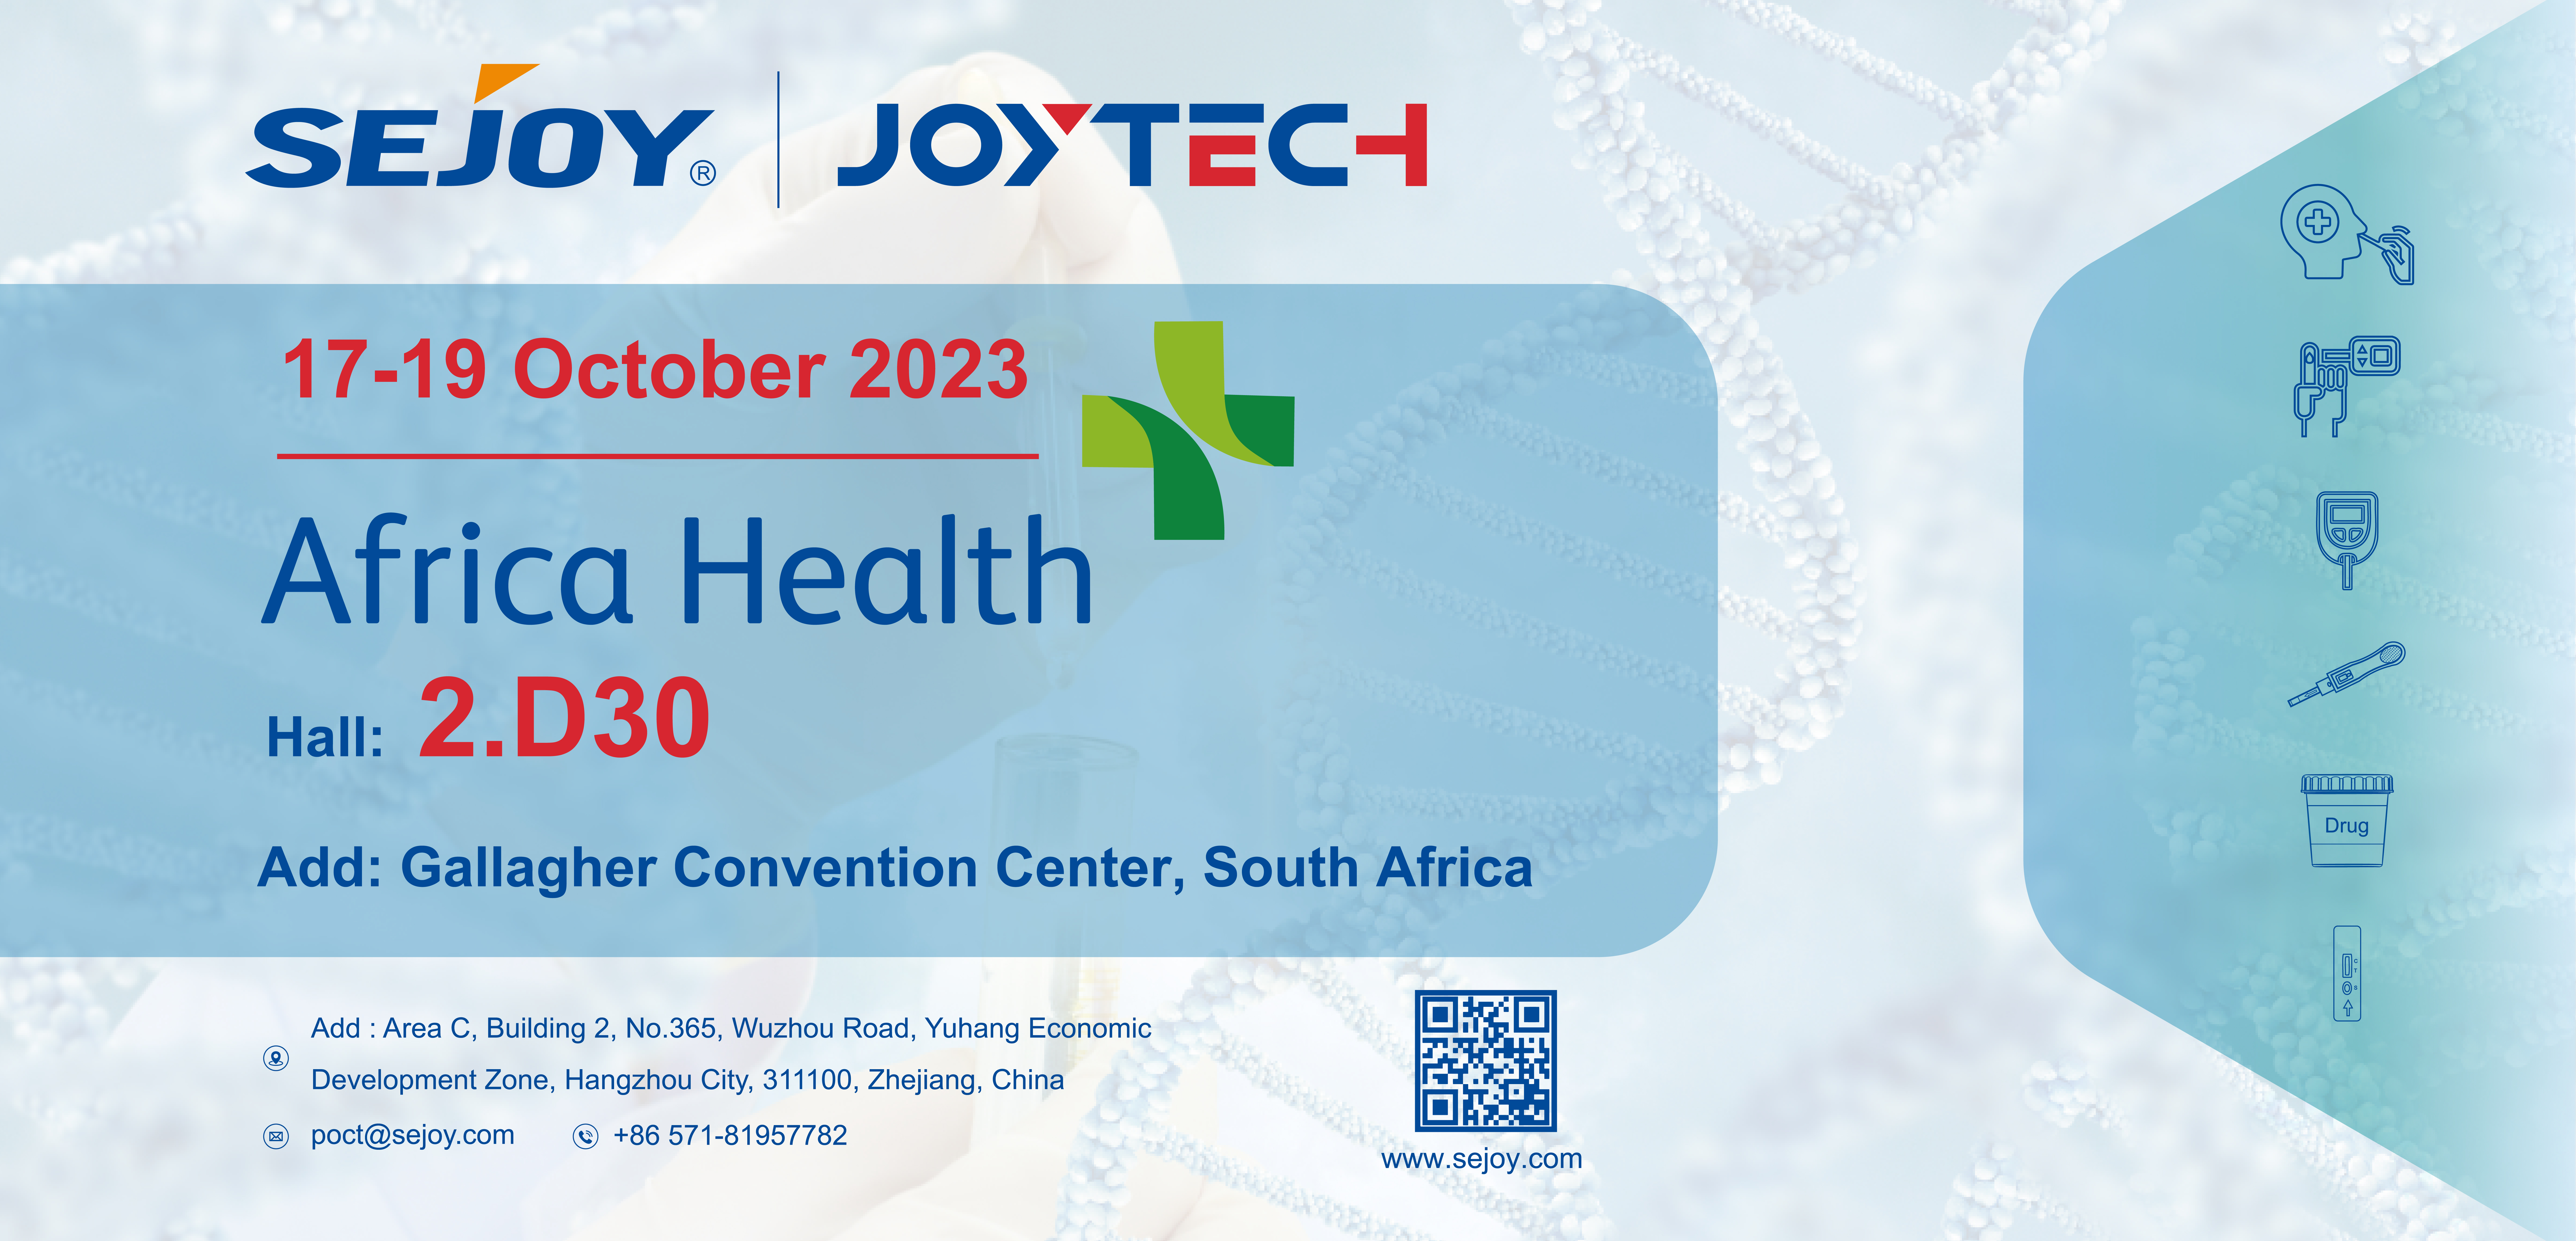 Africa Health 2023 SEJOY LOOK FORWARD TO SEEING YOU!